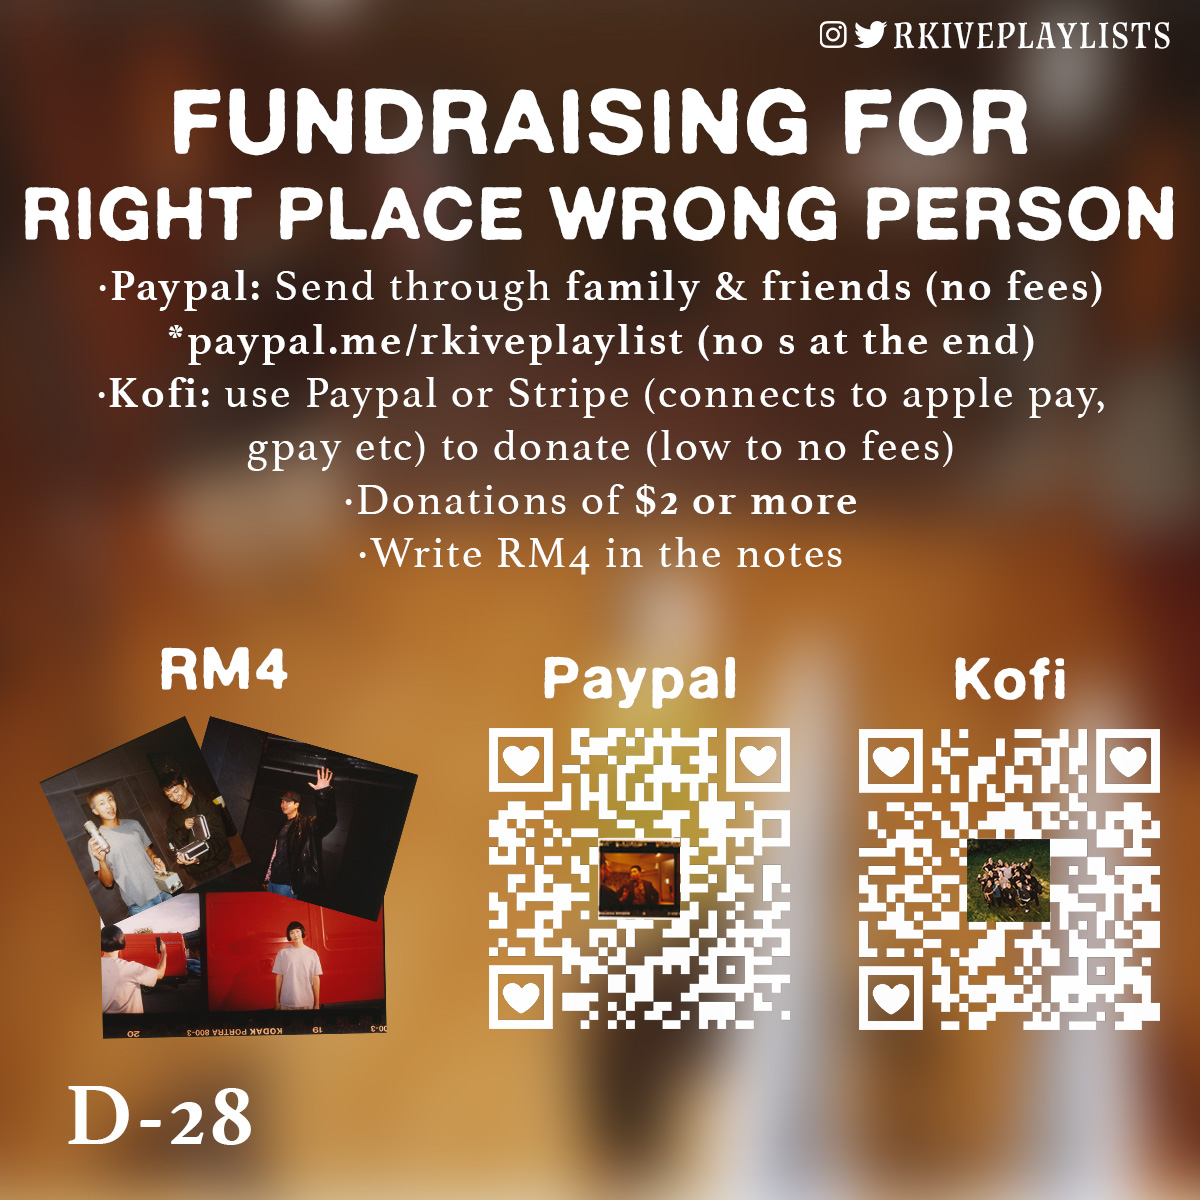 FUNDRAISING REMINDER for RM’s #RightPlaceWrongPerson!!! ↓↓↓ We are happy to do screenshot challenges in exchange for funds, feel free to DM us!! :) •paypal: paypal.me/rkiveplaylist •kofi: ko-fi.com/rkiveplaylists *can use Wise too, dm us to work out the info 💙😊